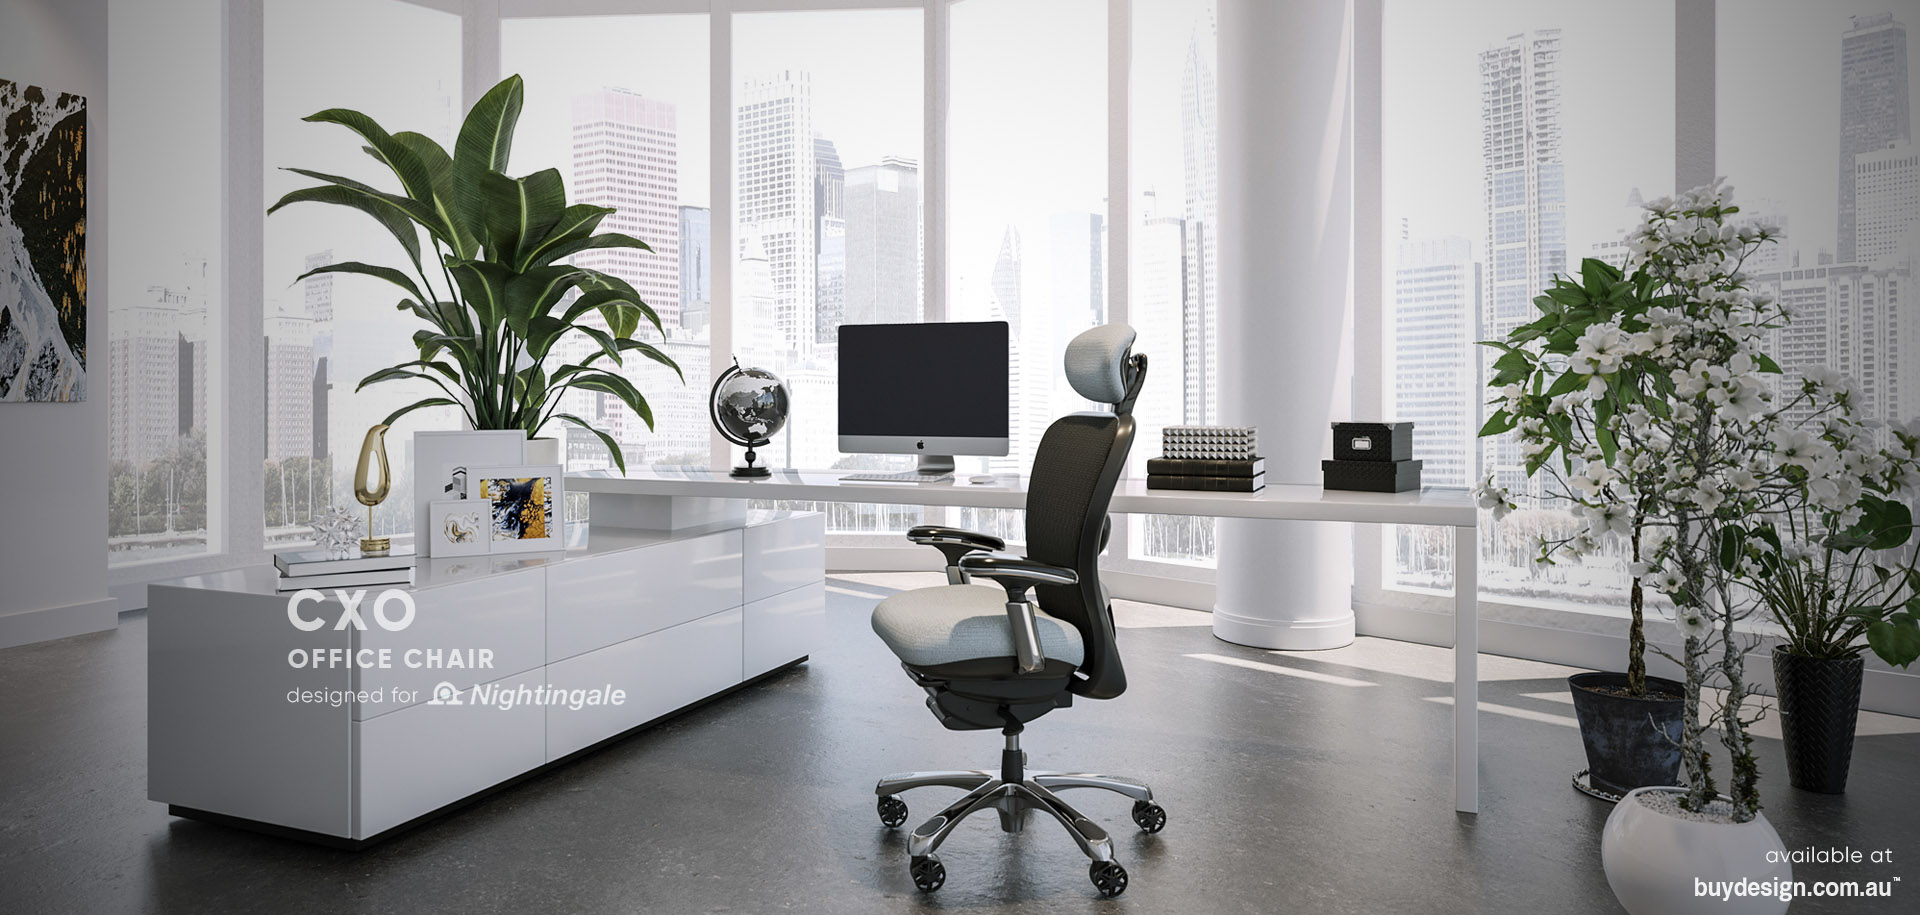 BuyDesign Nightingale CXO Office Chairs Collection